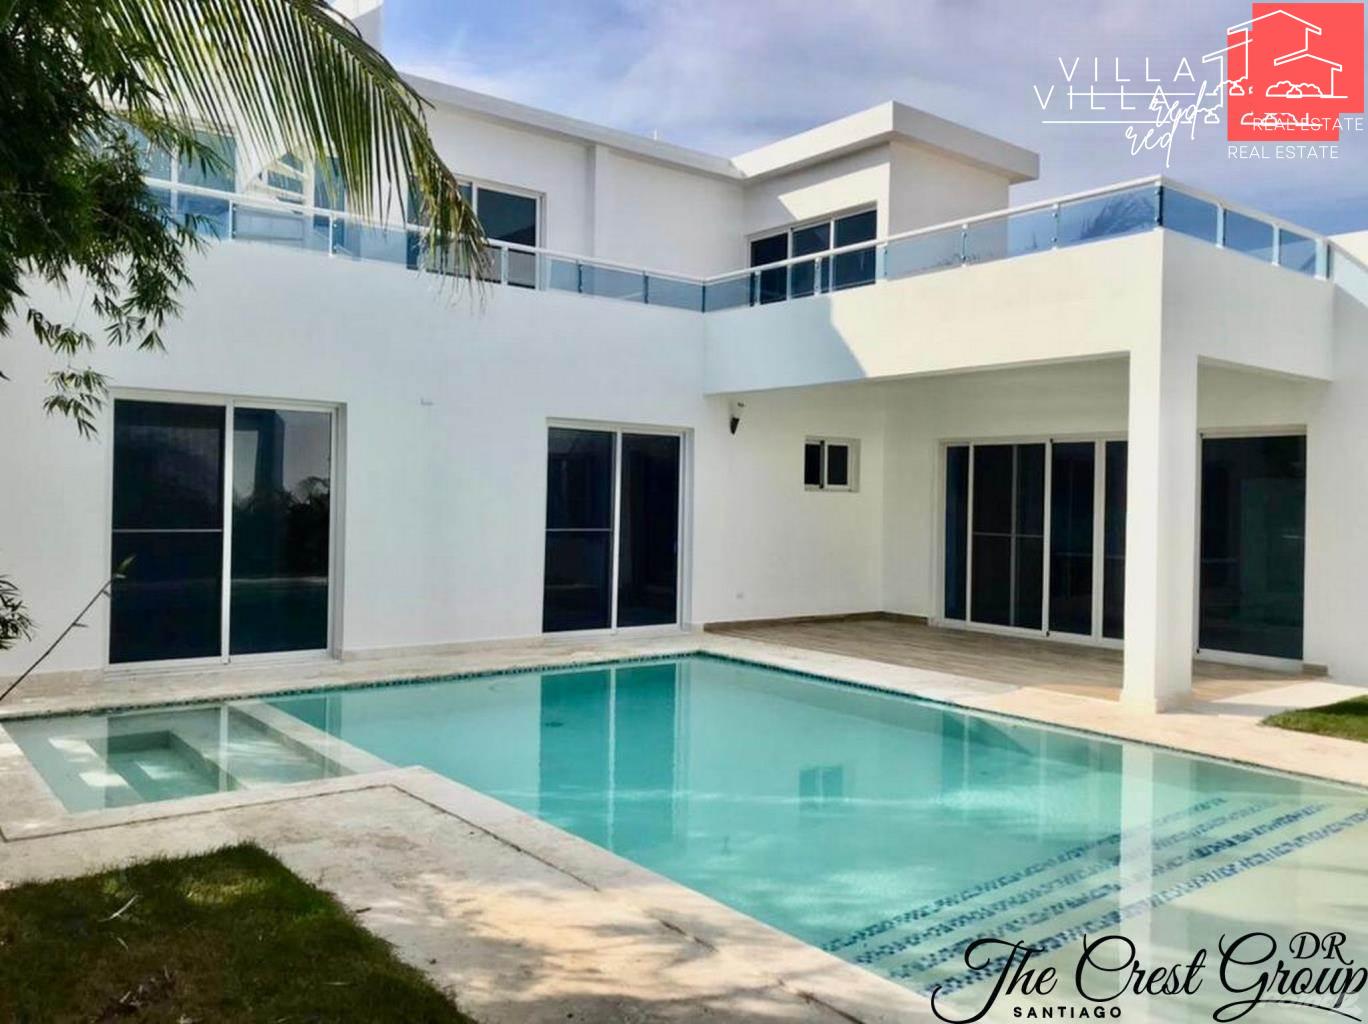 Villa.red Extraordinary Two Level Villa With Pool Jacuzzi And Terrace In Sosua https://villa.red/property/extraordinary-two-level-villa-with-pool-jacuzzi-and-terrace-in-sosua